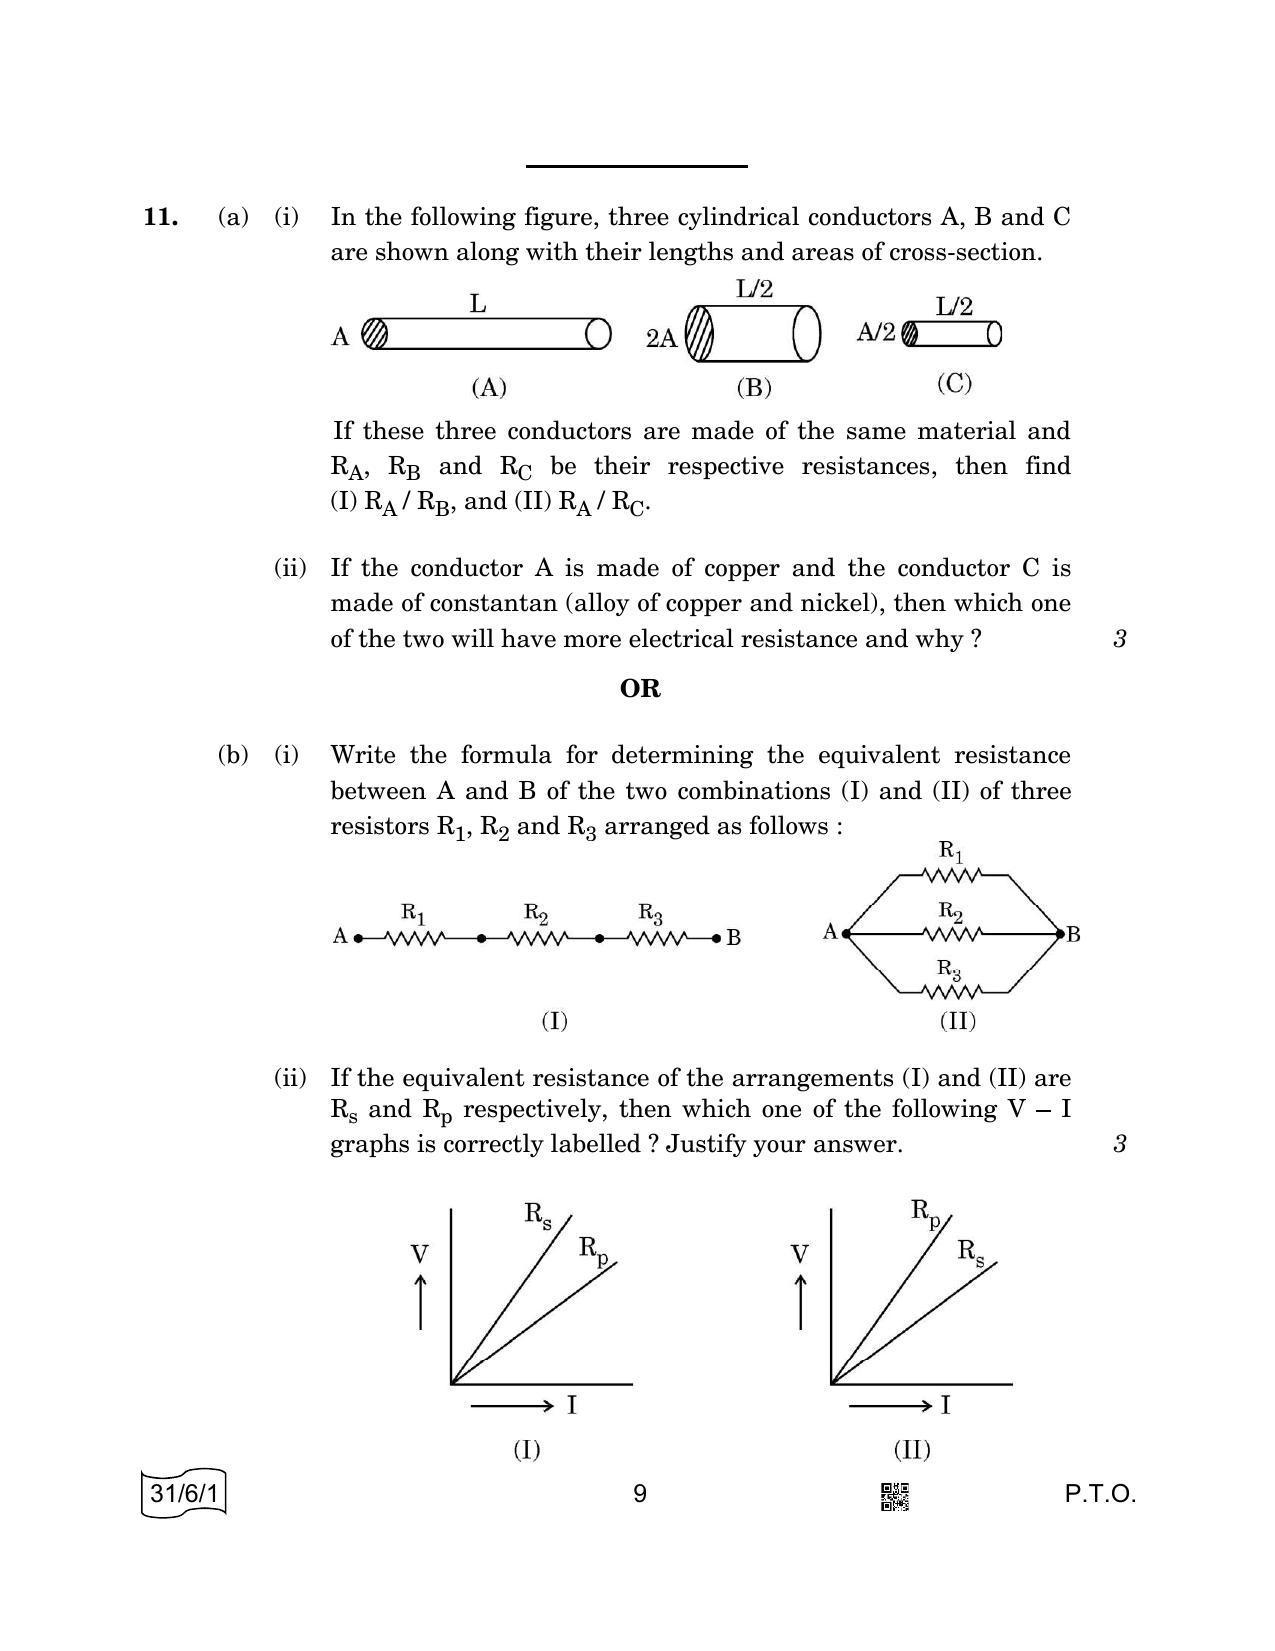 CBSE Class 10 31-6-1 SCIENCE 2022 Compartment Question Paper - Page 9